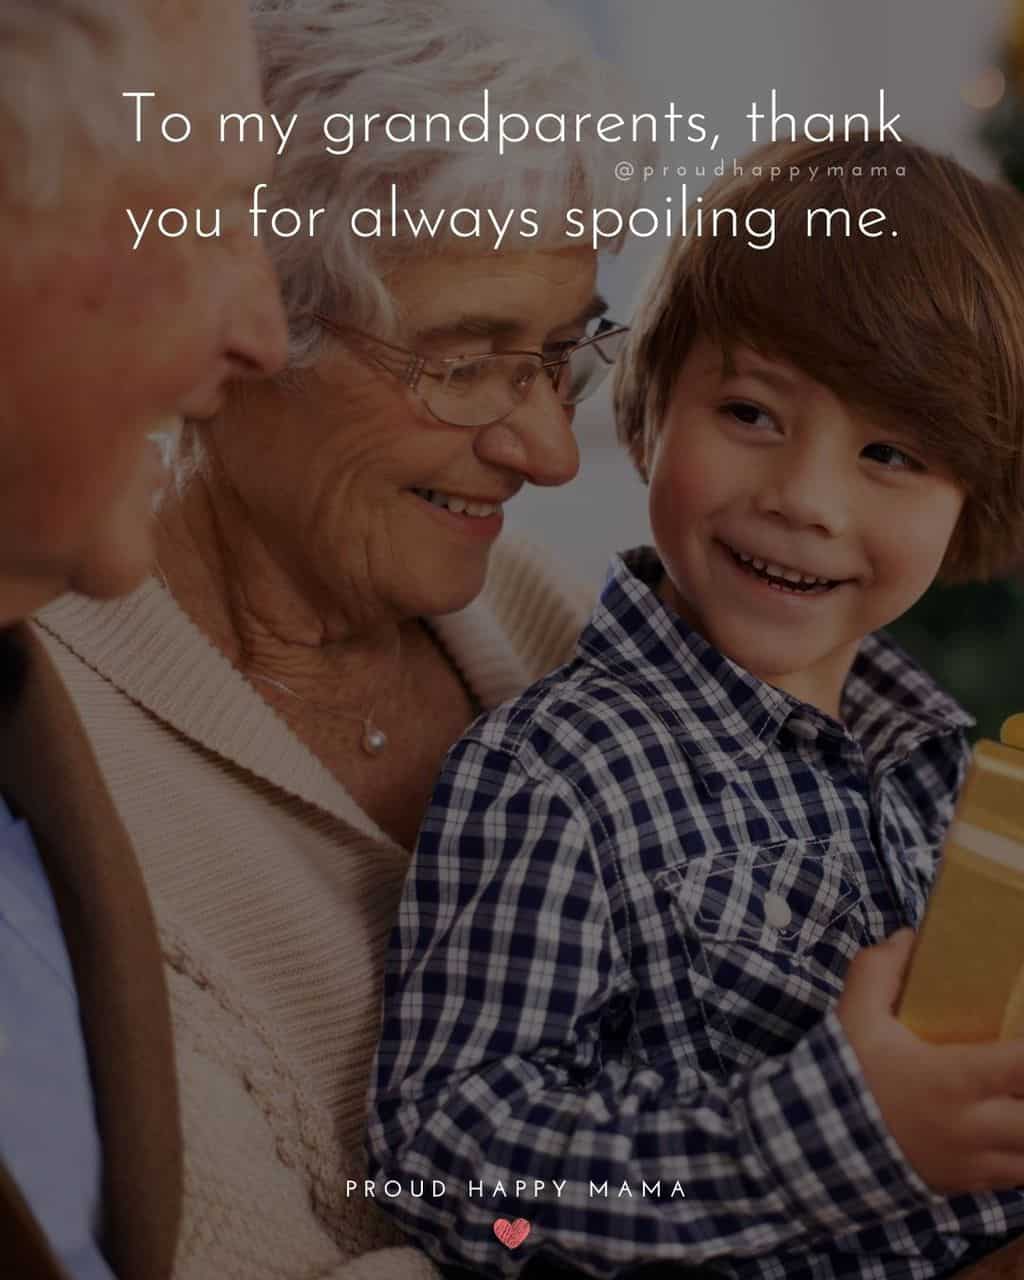 Grandparent Quotes – To my grandparents, thank you for always spoiling me.’